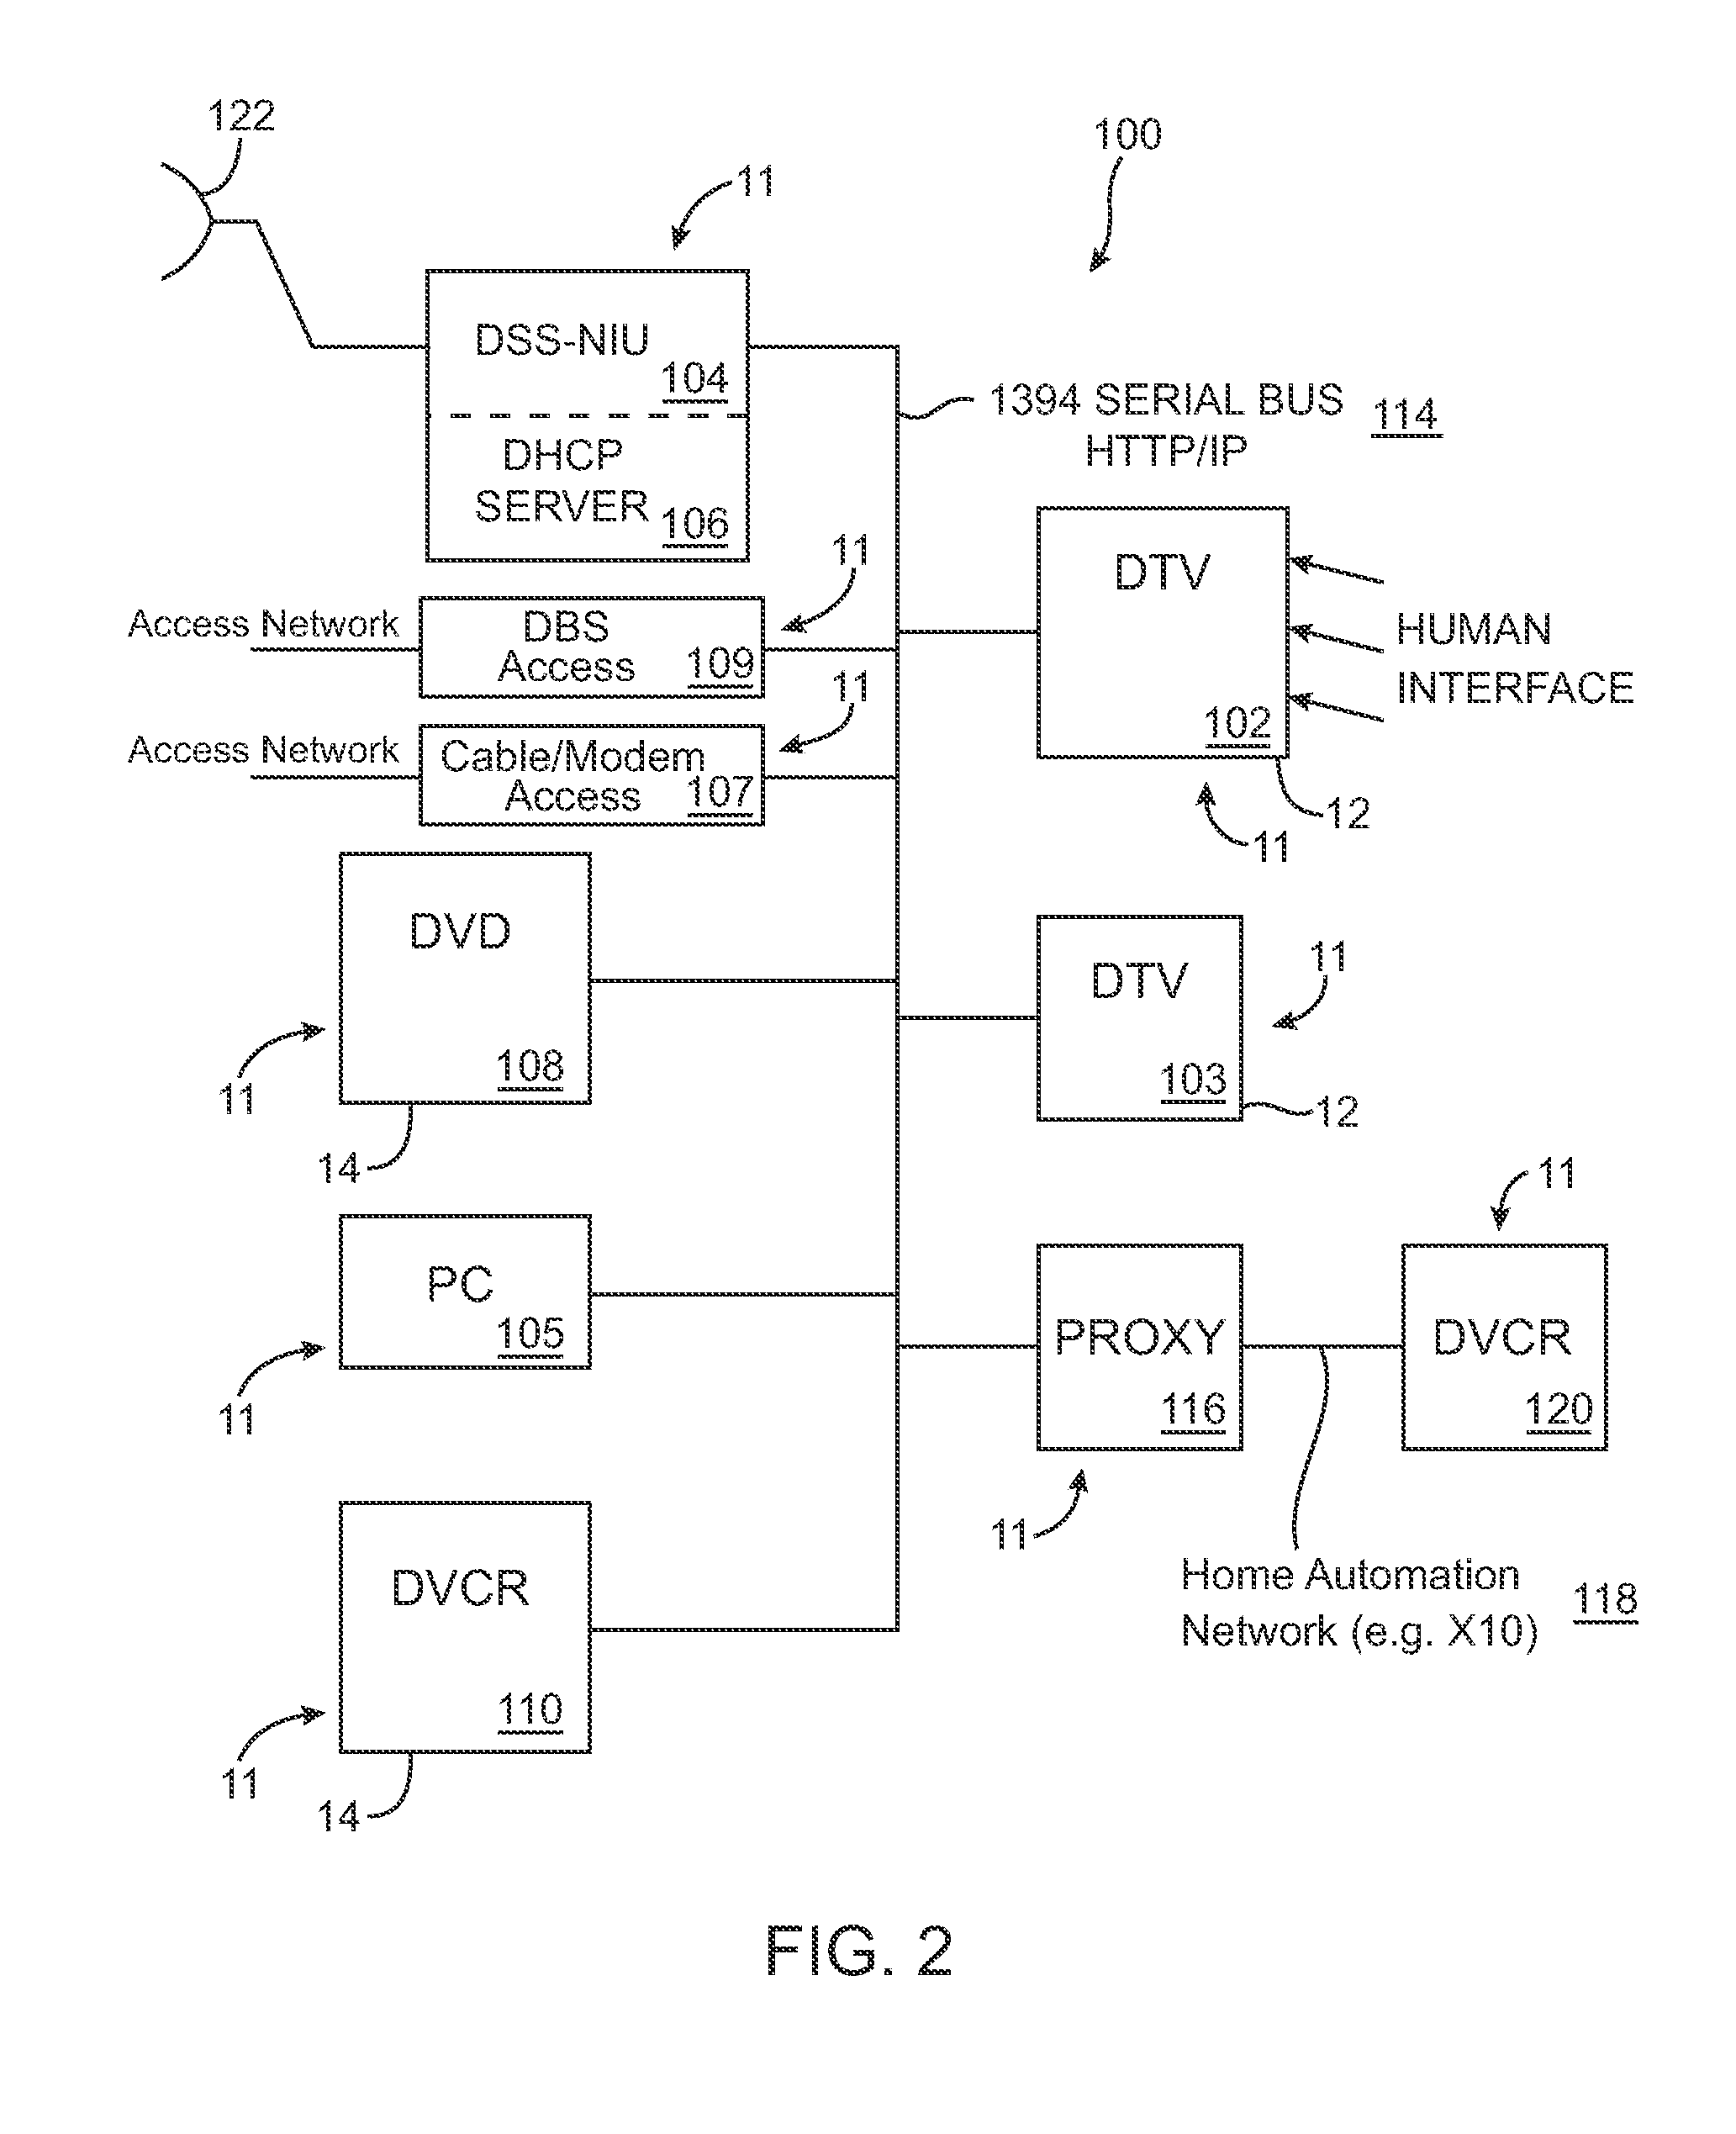 Device customized home network top-level information architecture